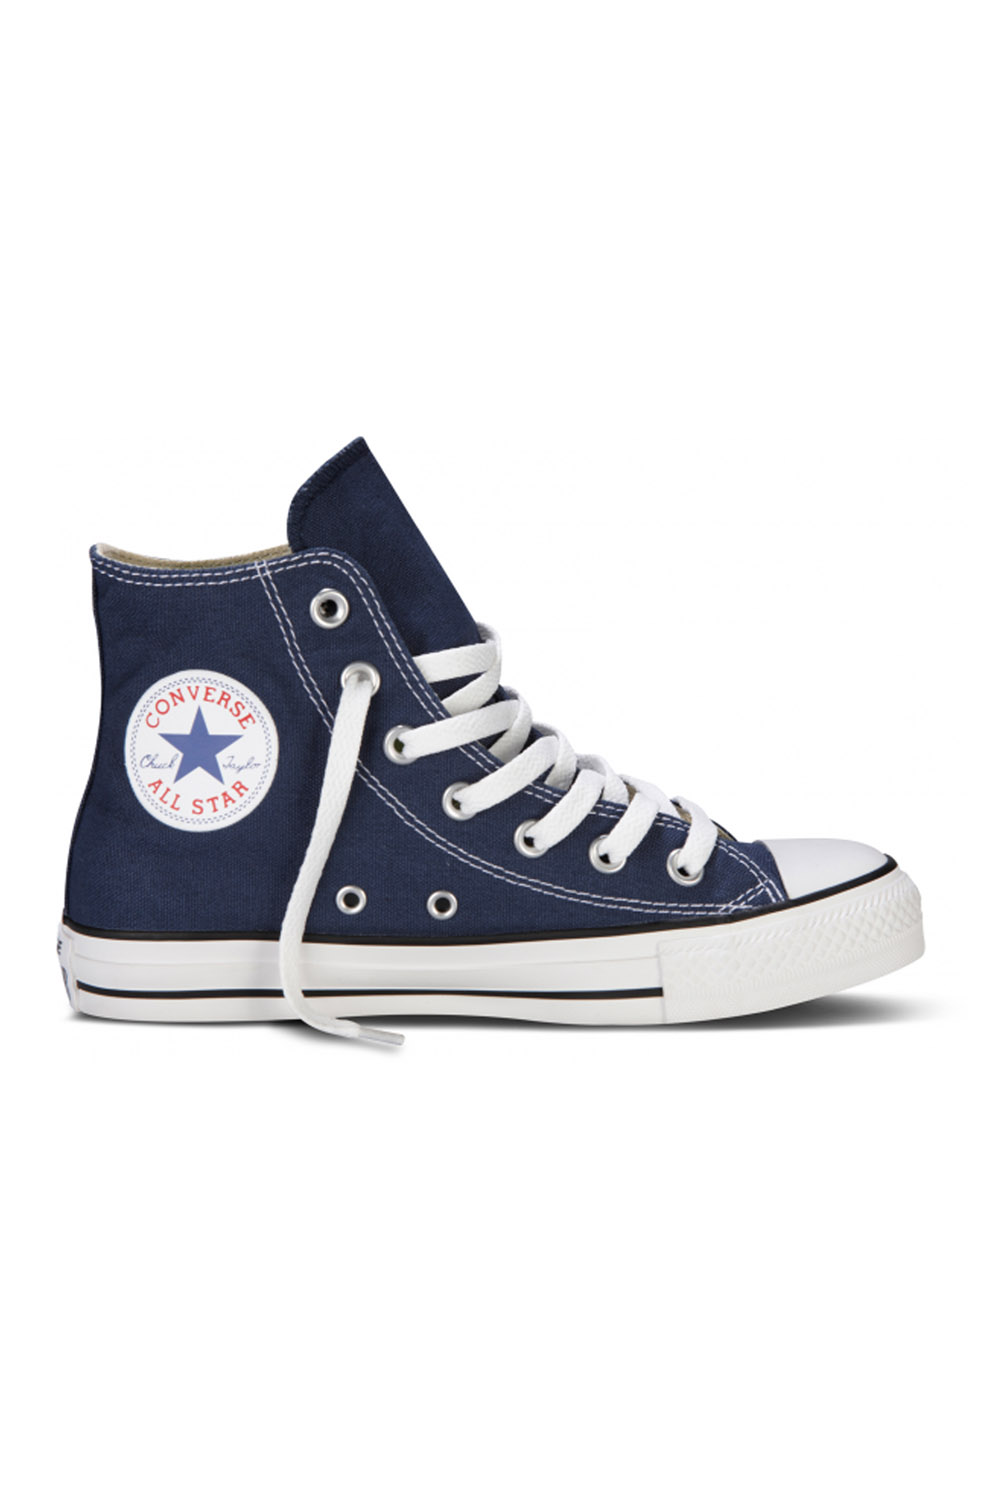 Converse High Top Sneakers Navy in Blue (navy) | Lyst